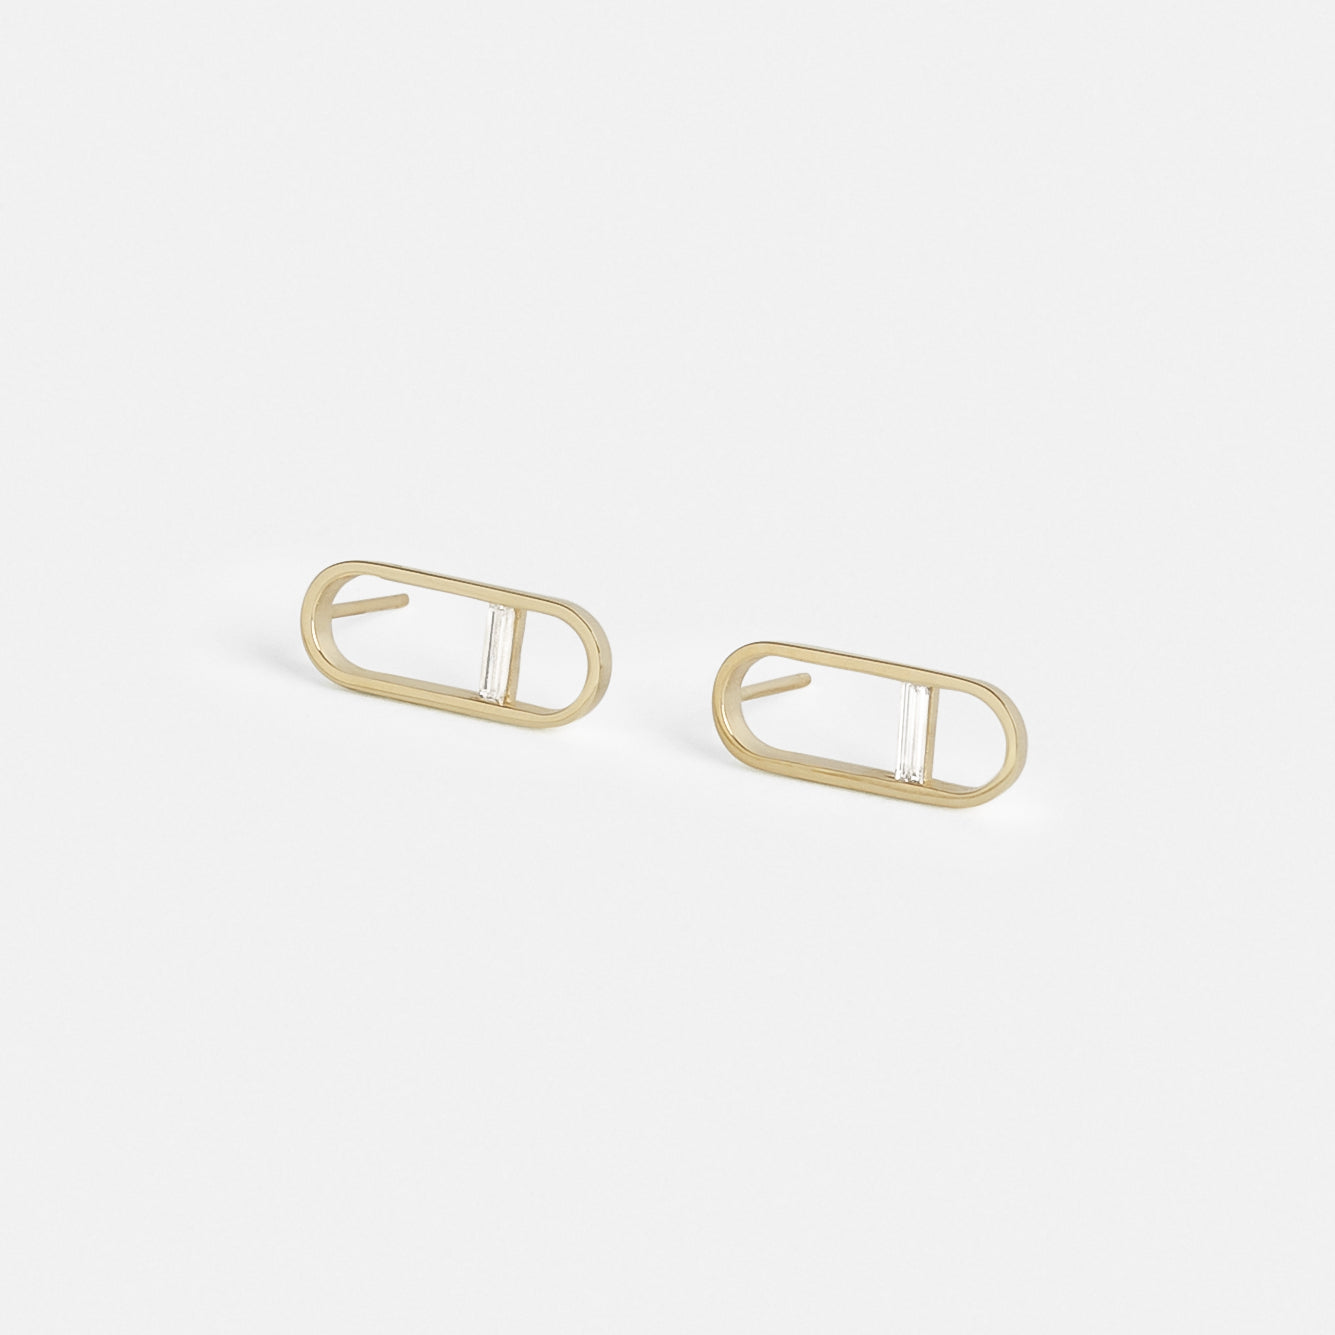 Ranga Unique Earrings in 14k Gold set with White Diamonds By SHW Fine Jewelry NYC